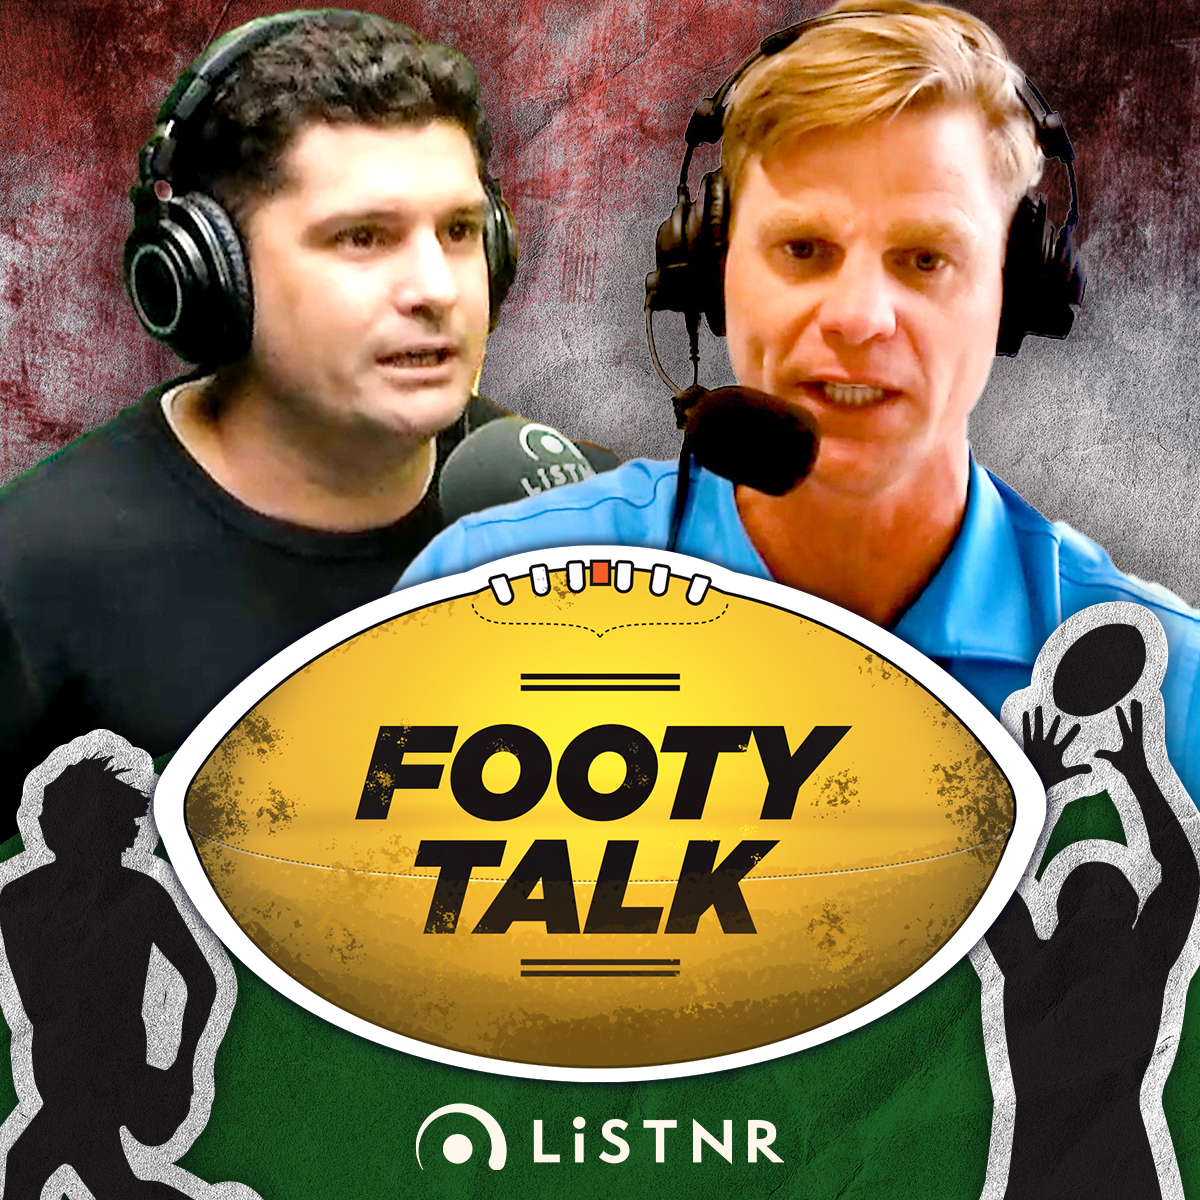 Tuesday March 19: Rooey goes the MRO, Joey's analysis of Brisbane's 0-2 start & Nick's take on Tassie